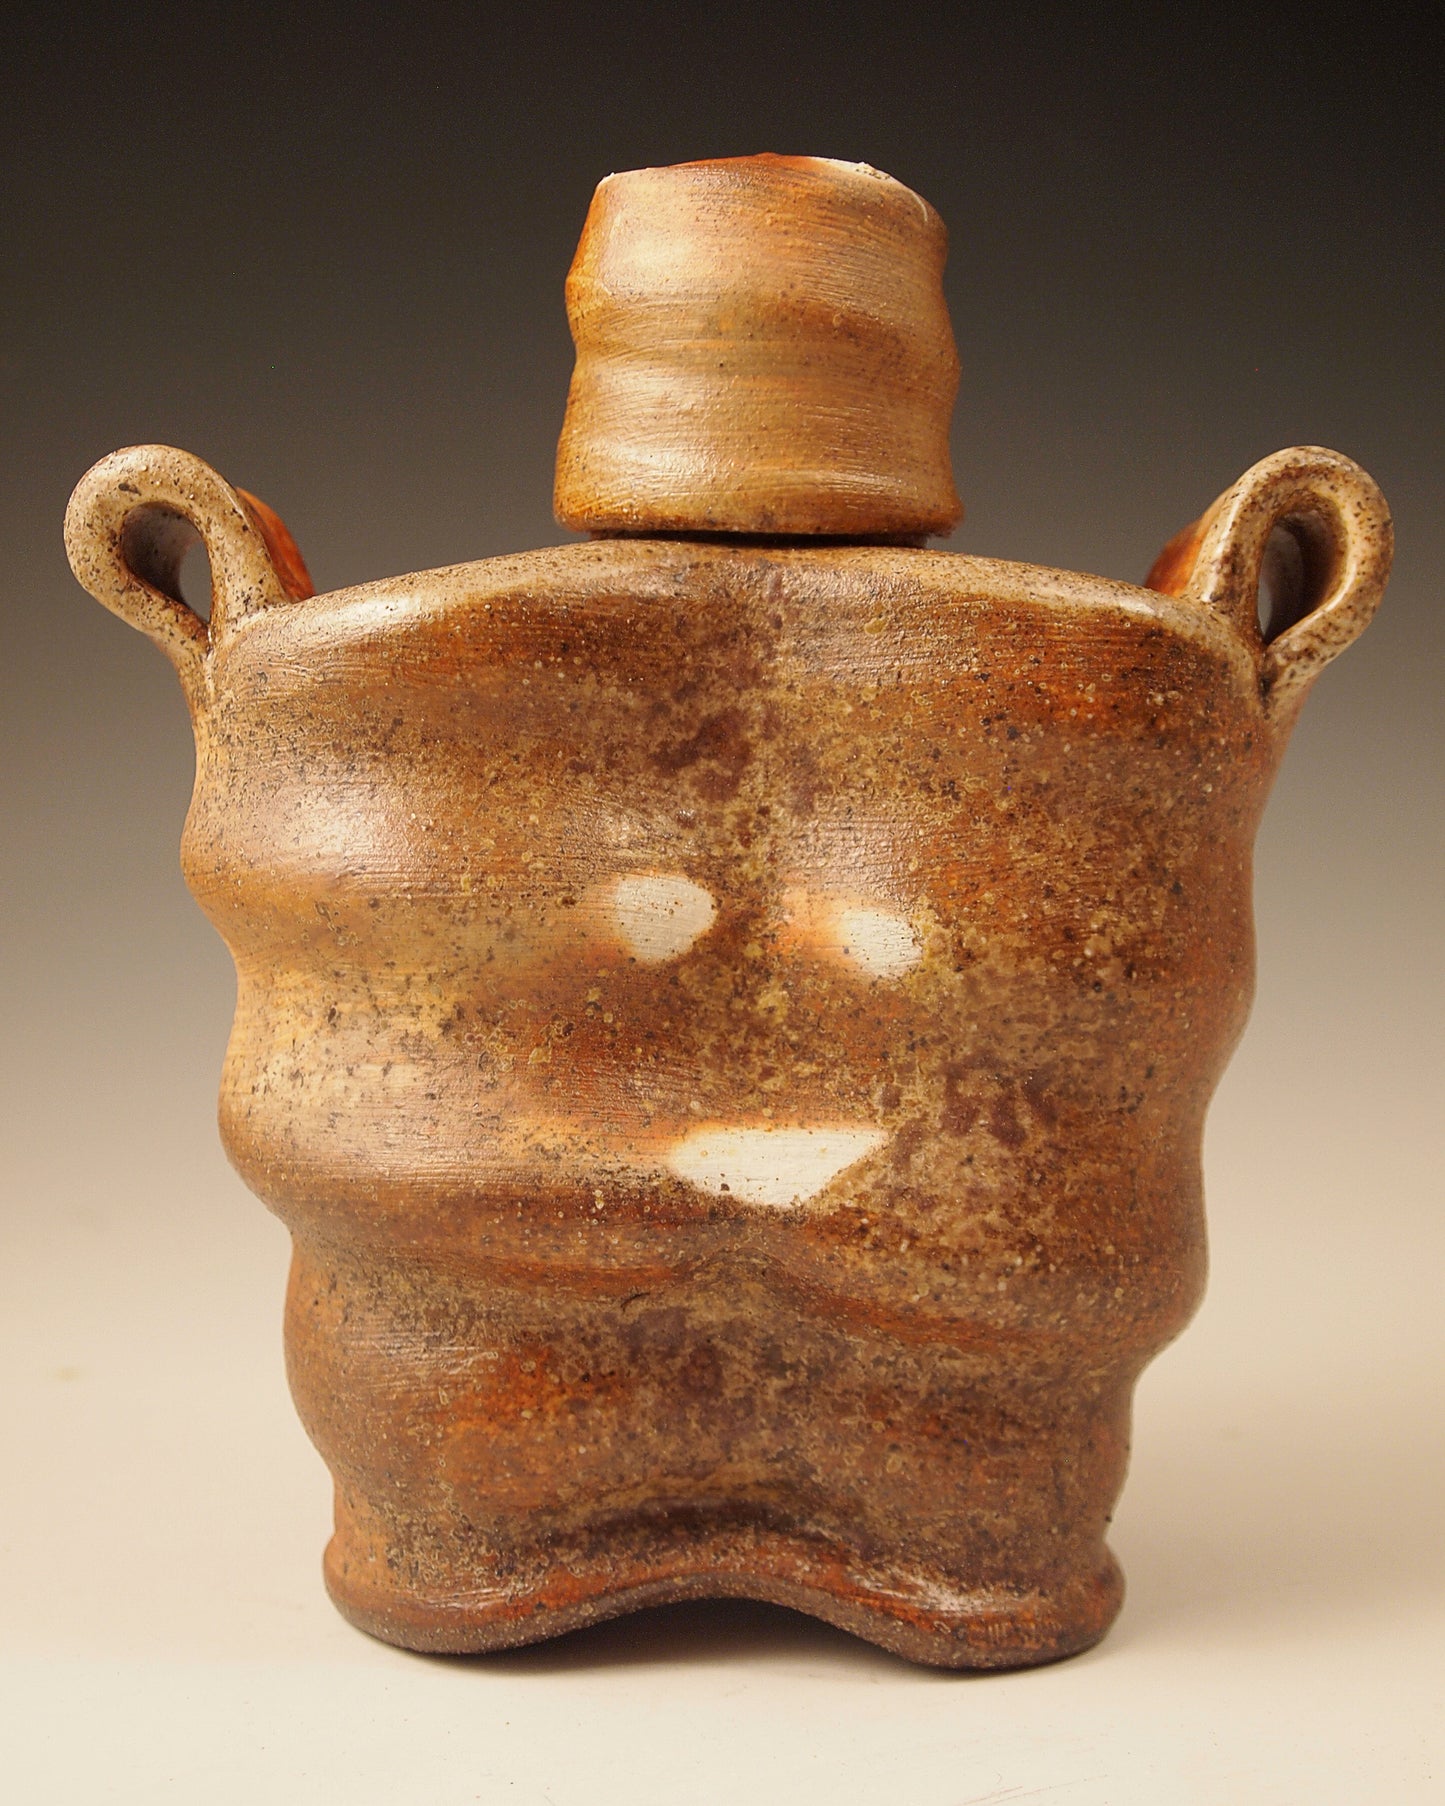 Wood-fired stoneware whiskey flask with liner glaze. Handmade Pottery.  Unique design, yet functional. 7" tall. 6" wide.  3" deep.  Back view shown here.